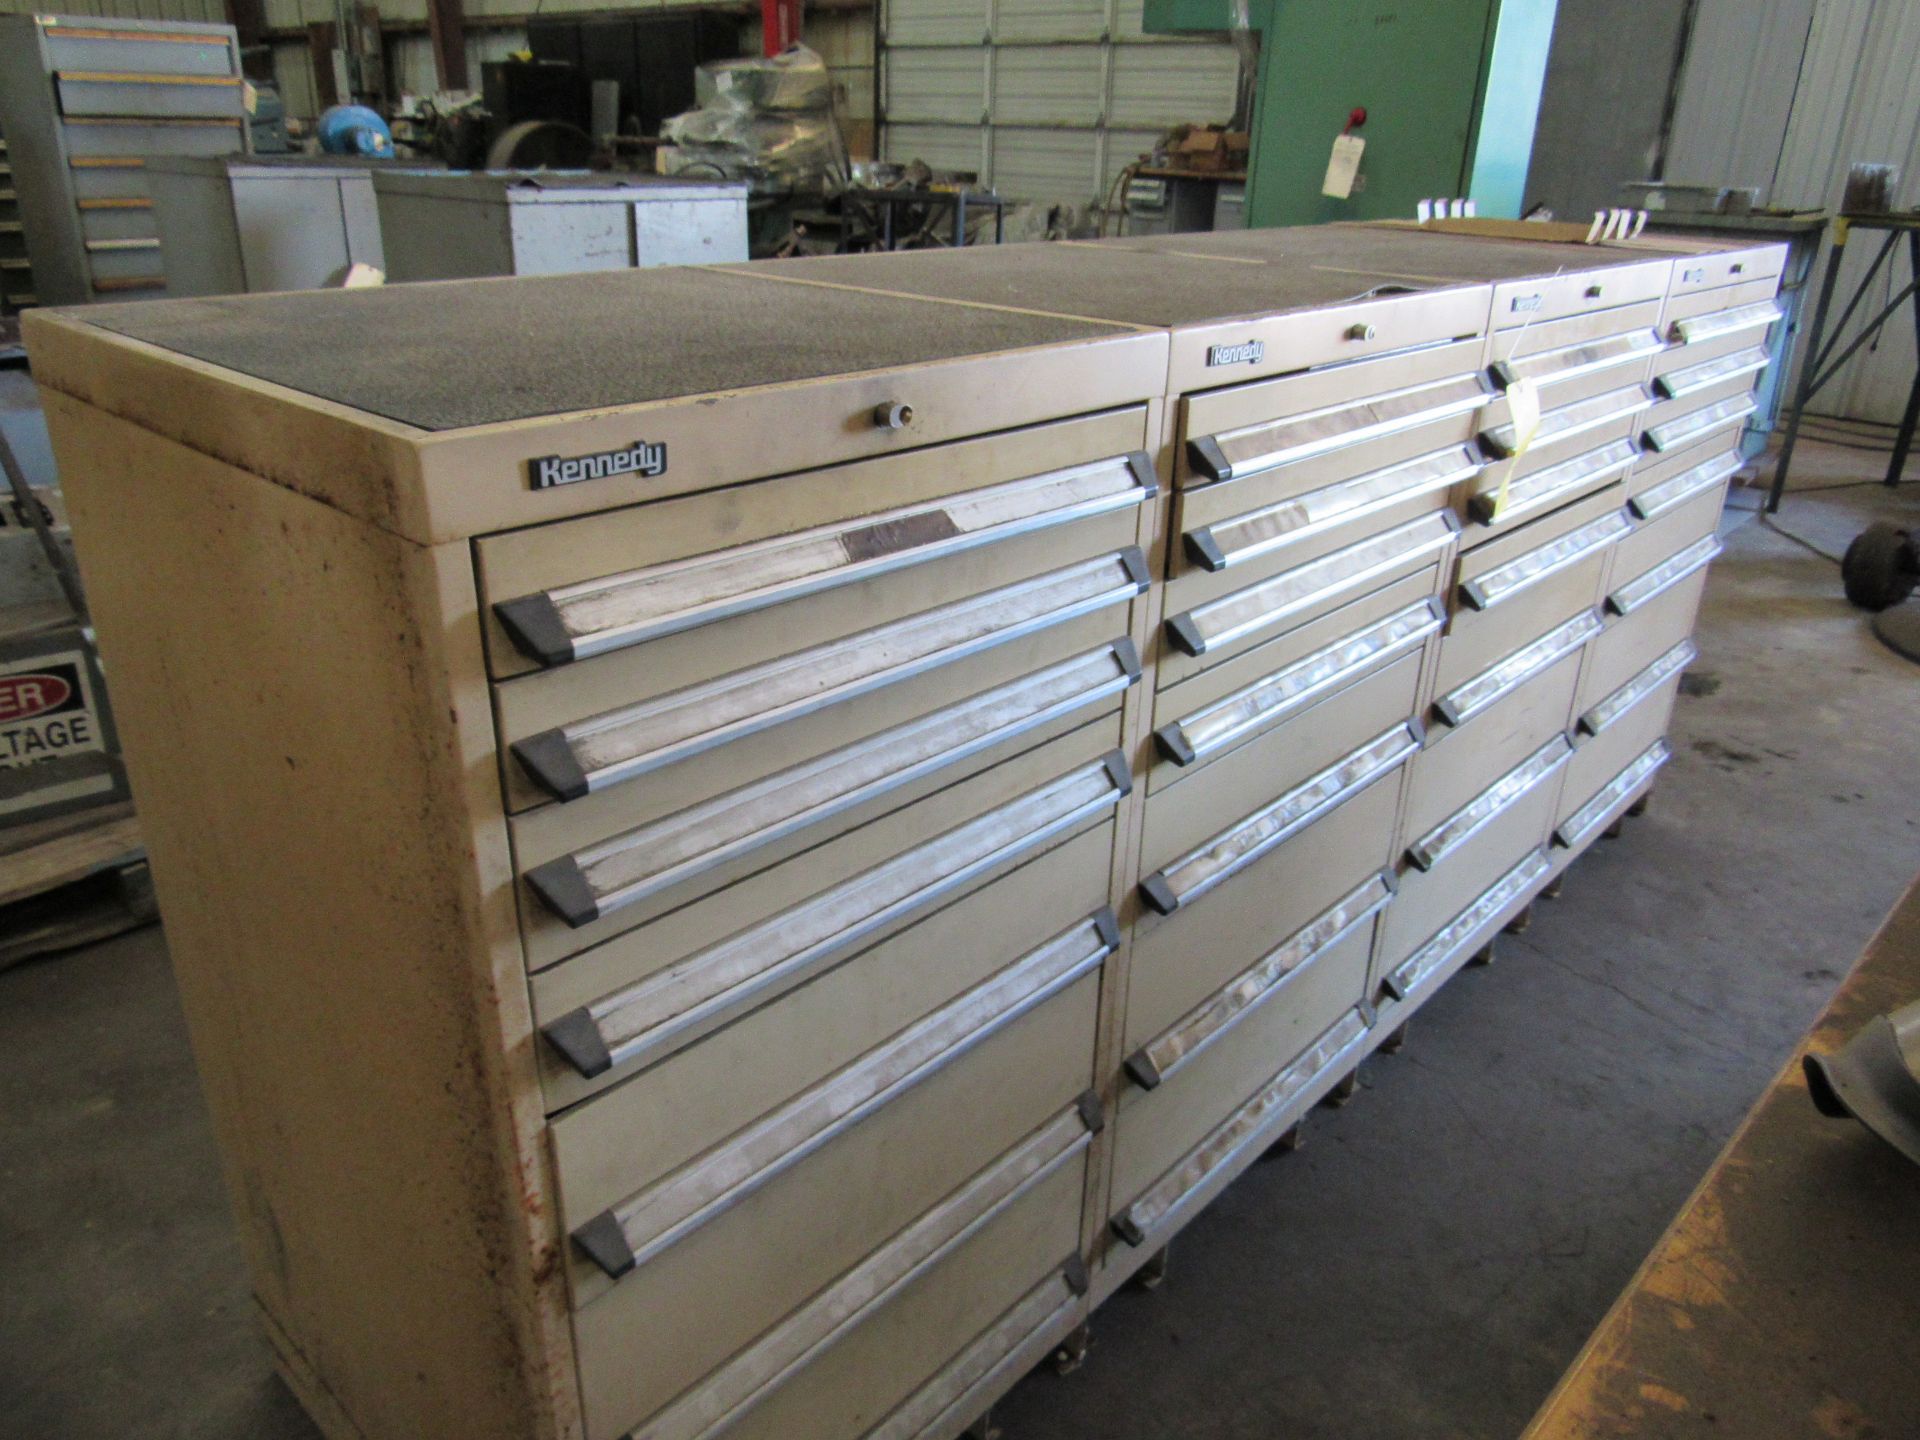 Four Kennedy 7 Drawer Tool Cabinets, Connected, with Contents (Inspections Tools, Dies, Drill